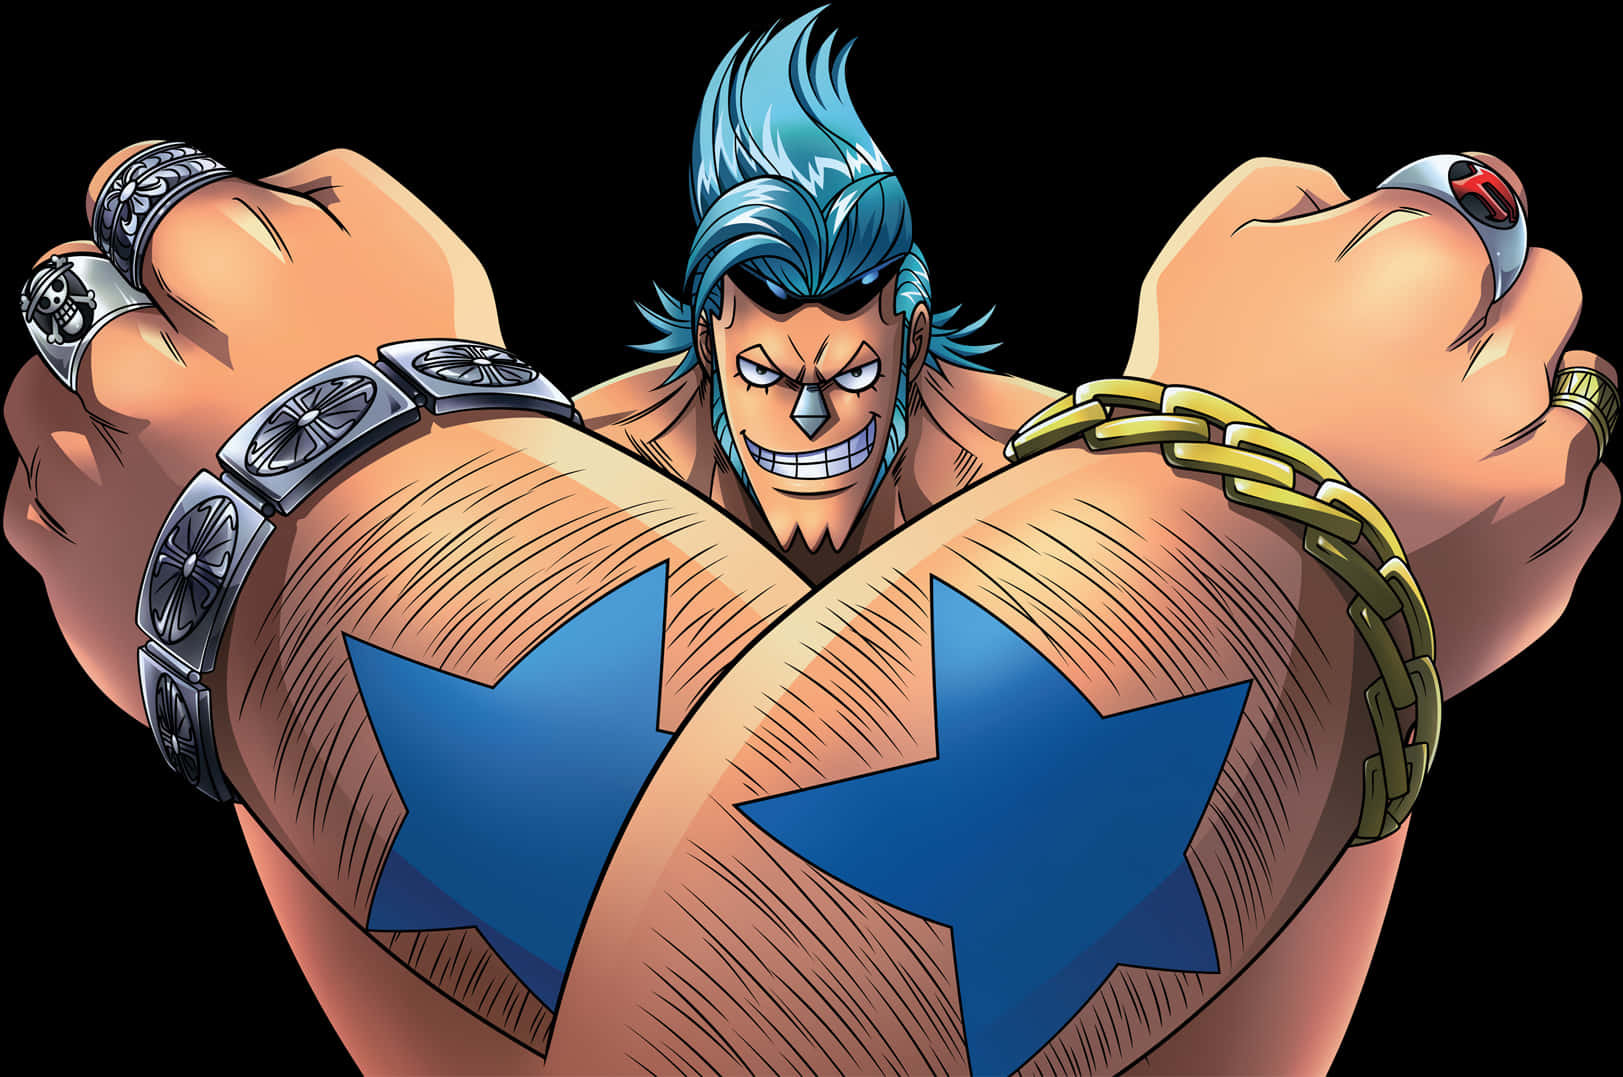 Cartoon Of A Man With Blue Hair And Blue Tattoos